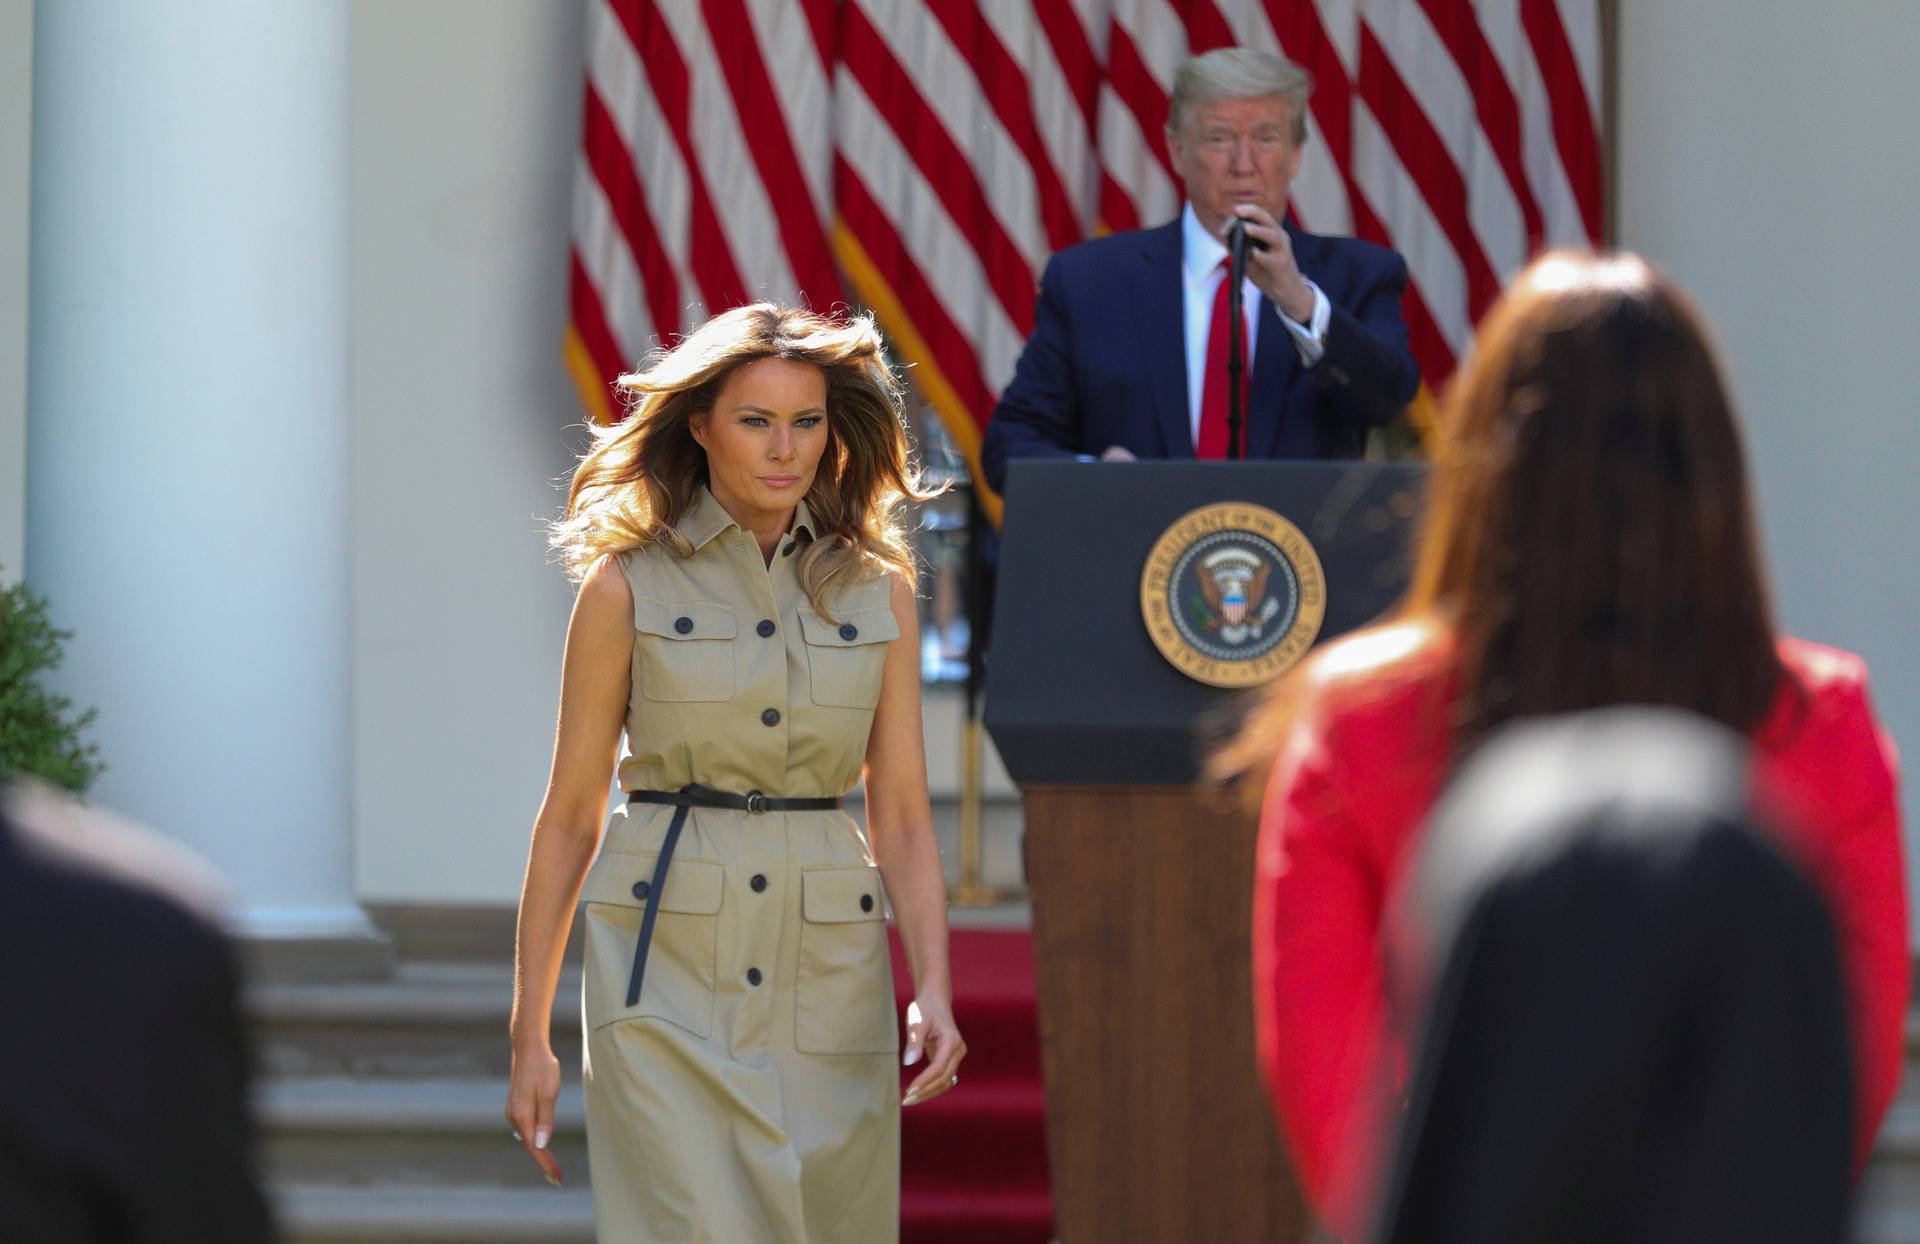 First lady Melania Trump and U.S. President Trump arrive at White House National Day of Prayer Service in the Rose Garden at the White House in Washington